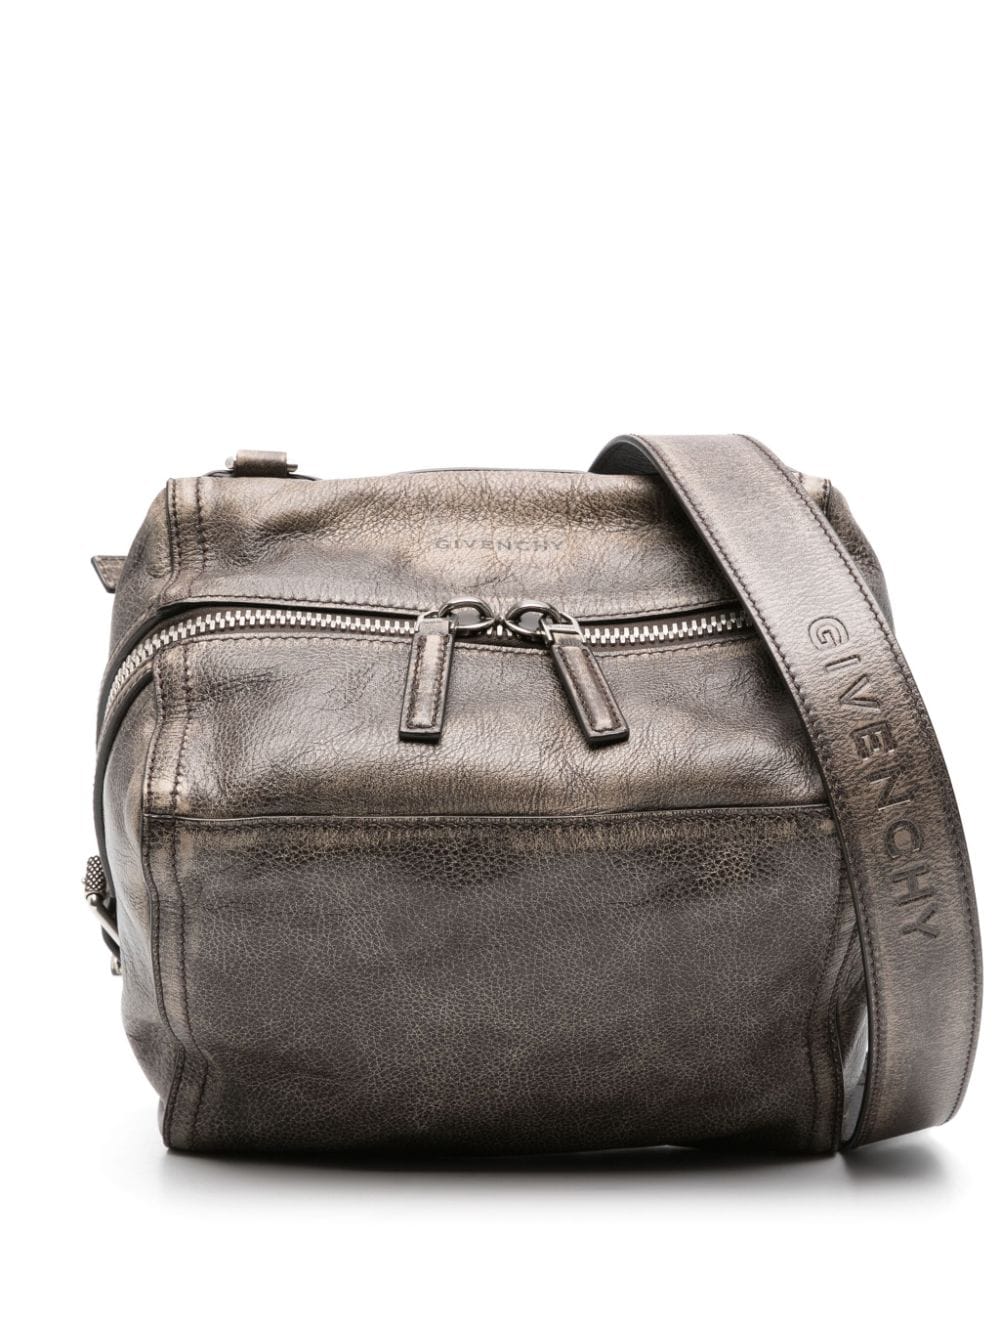 Givenchy Small Pandora Leather Messenger Bag In Brown